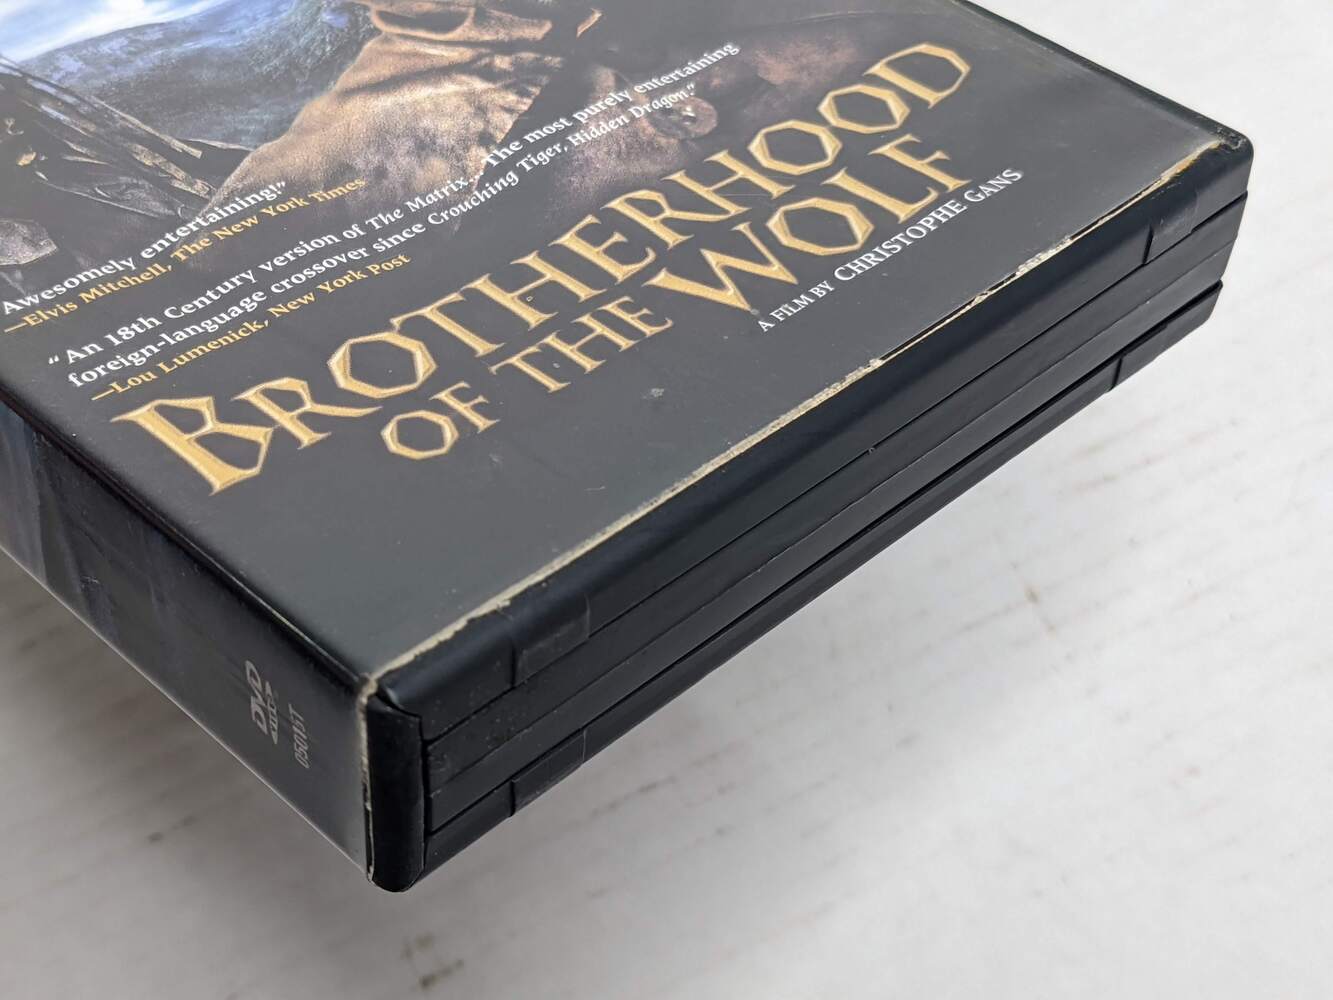 The Brotherhood of the Wolf (DVD, 2002, 3-Disc Set, Collectors Edition) 